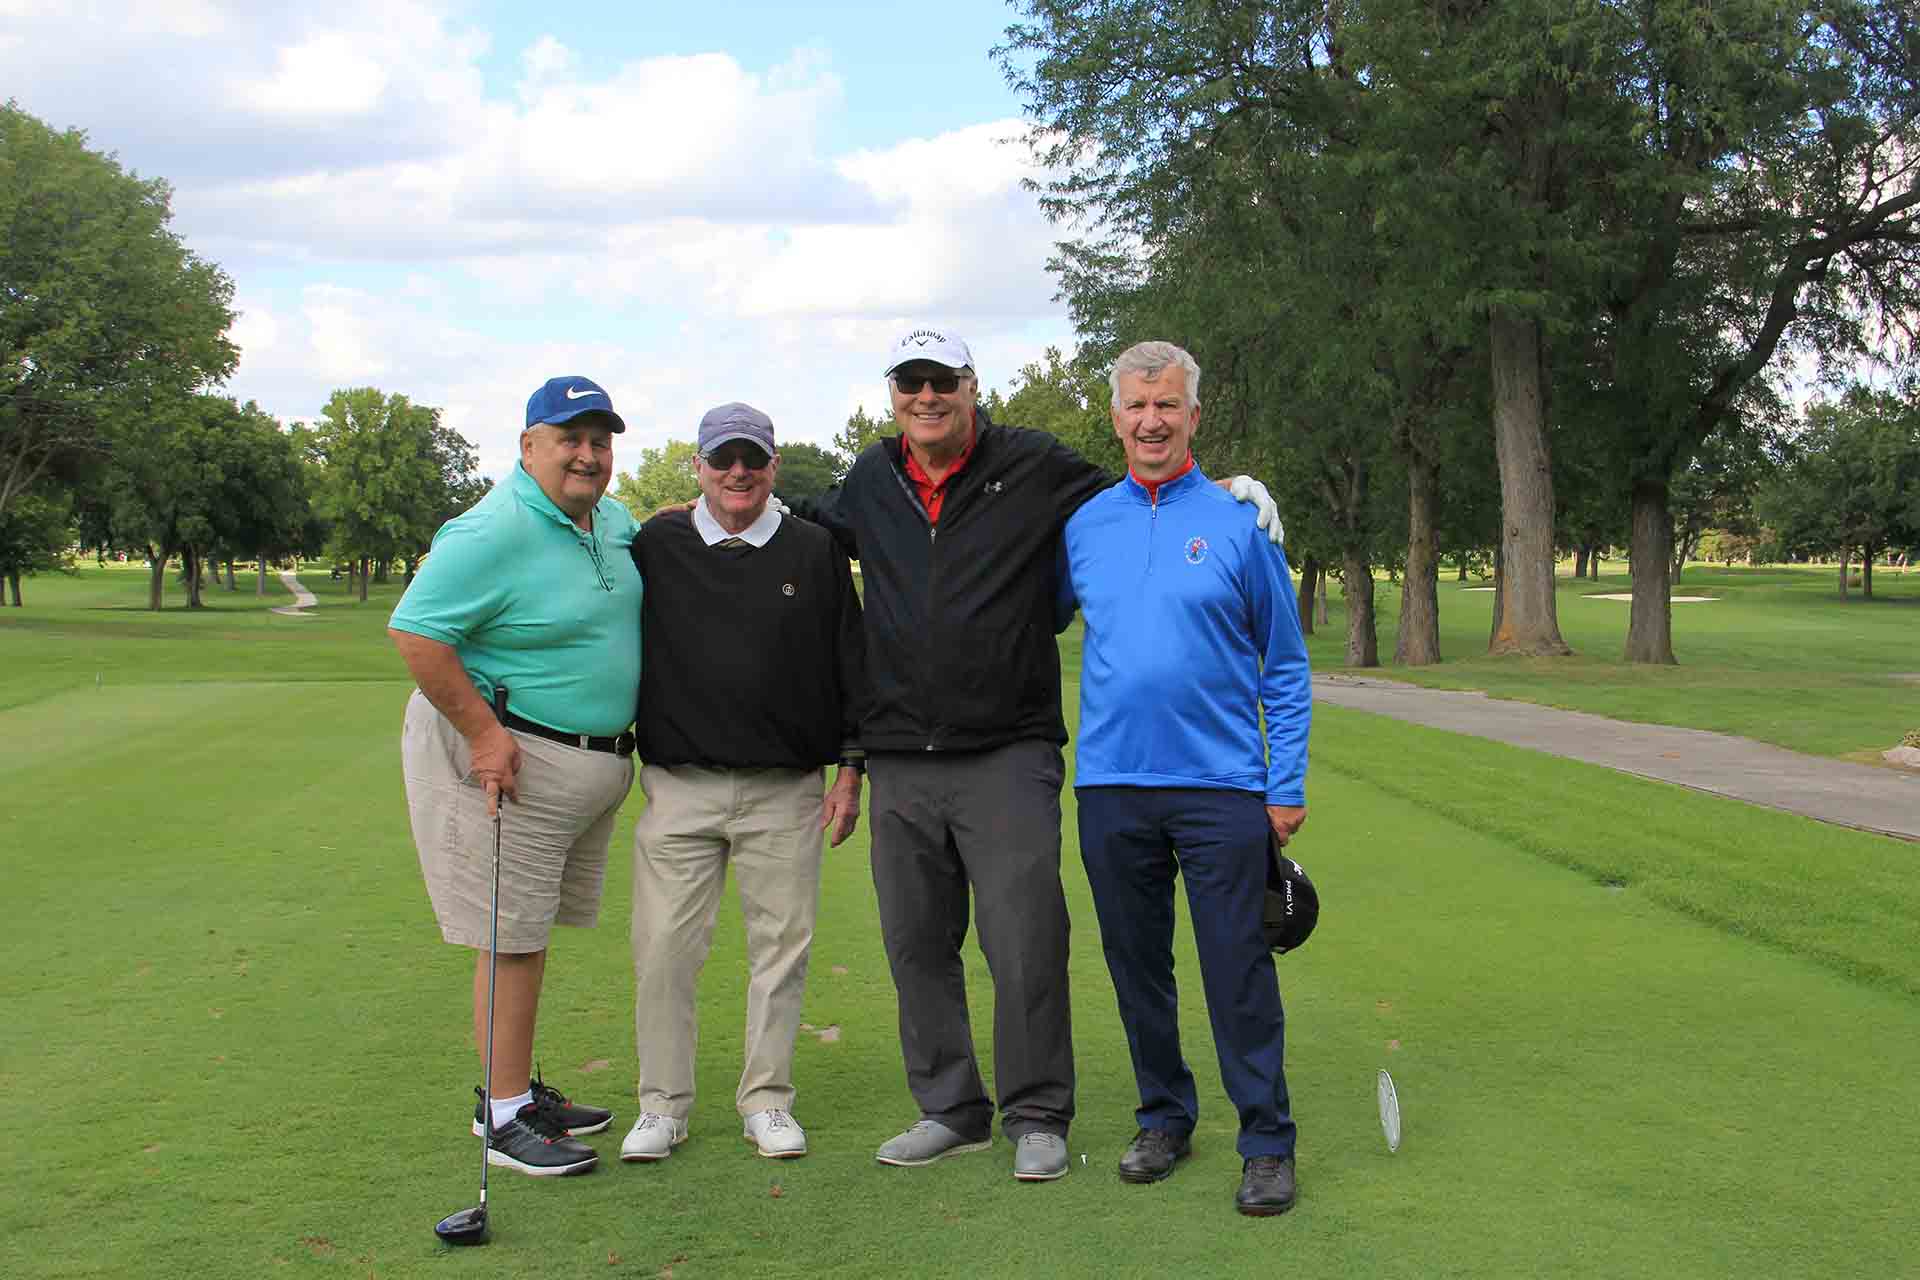 2022-Endowment-Golf-Classic-four-people-smiling-together